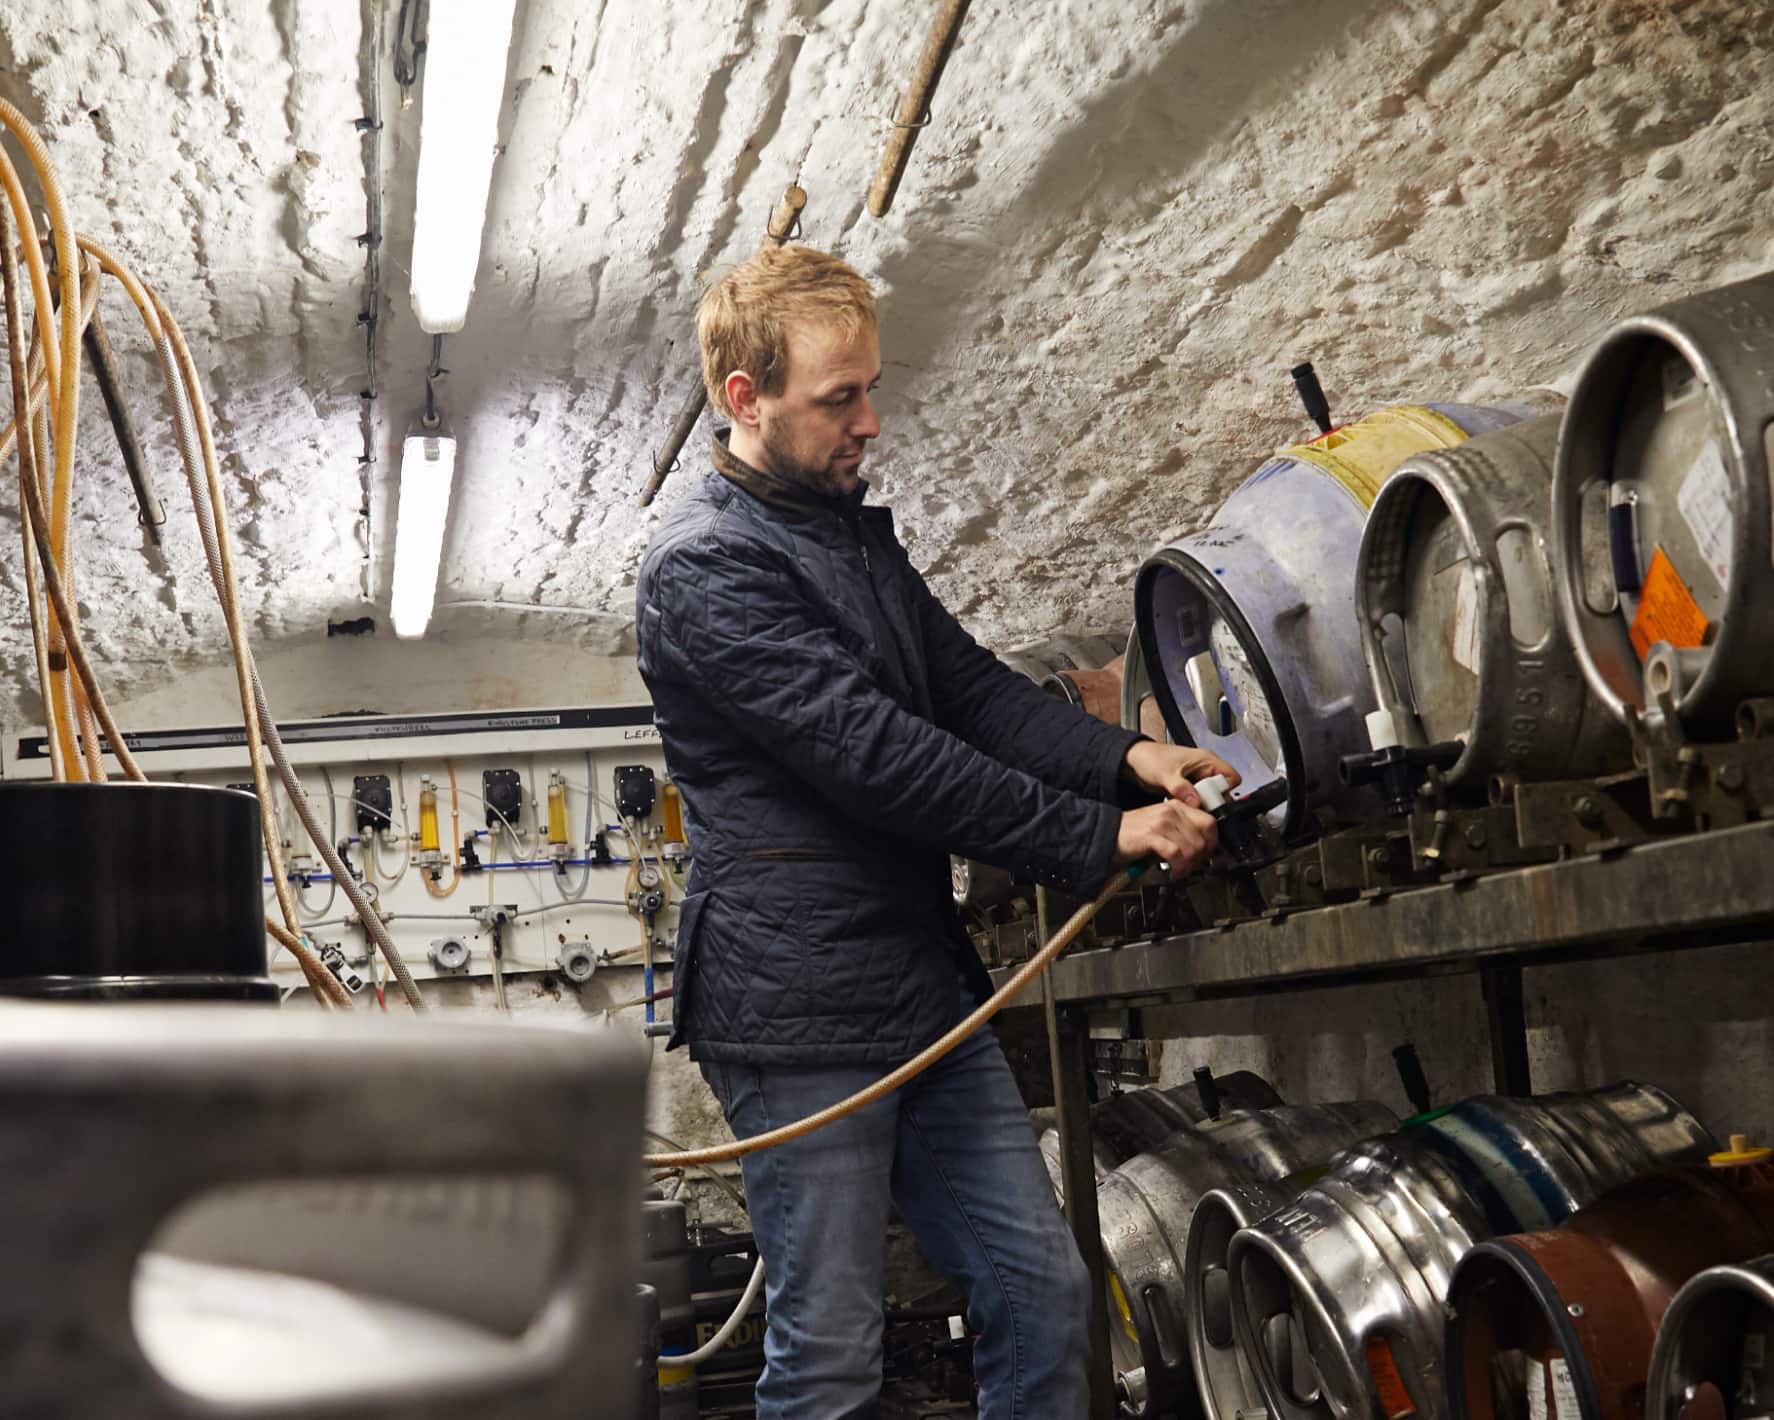 A person filling a beer keg in a brewery.